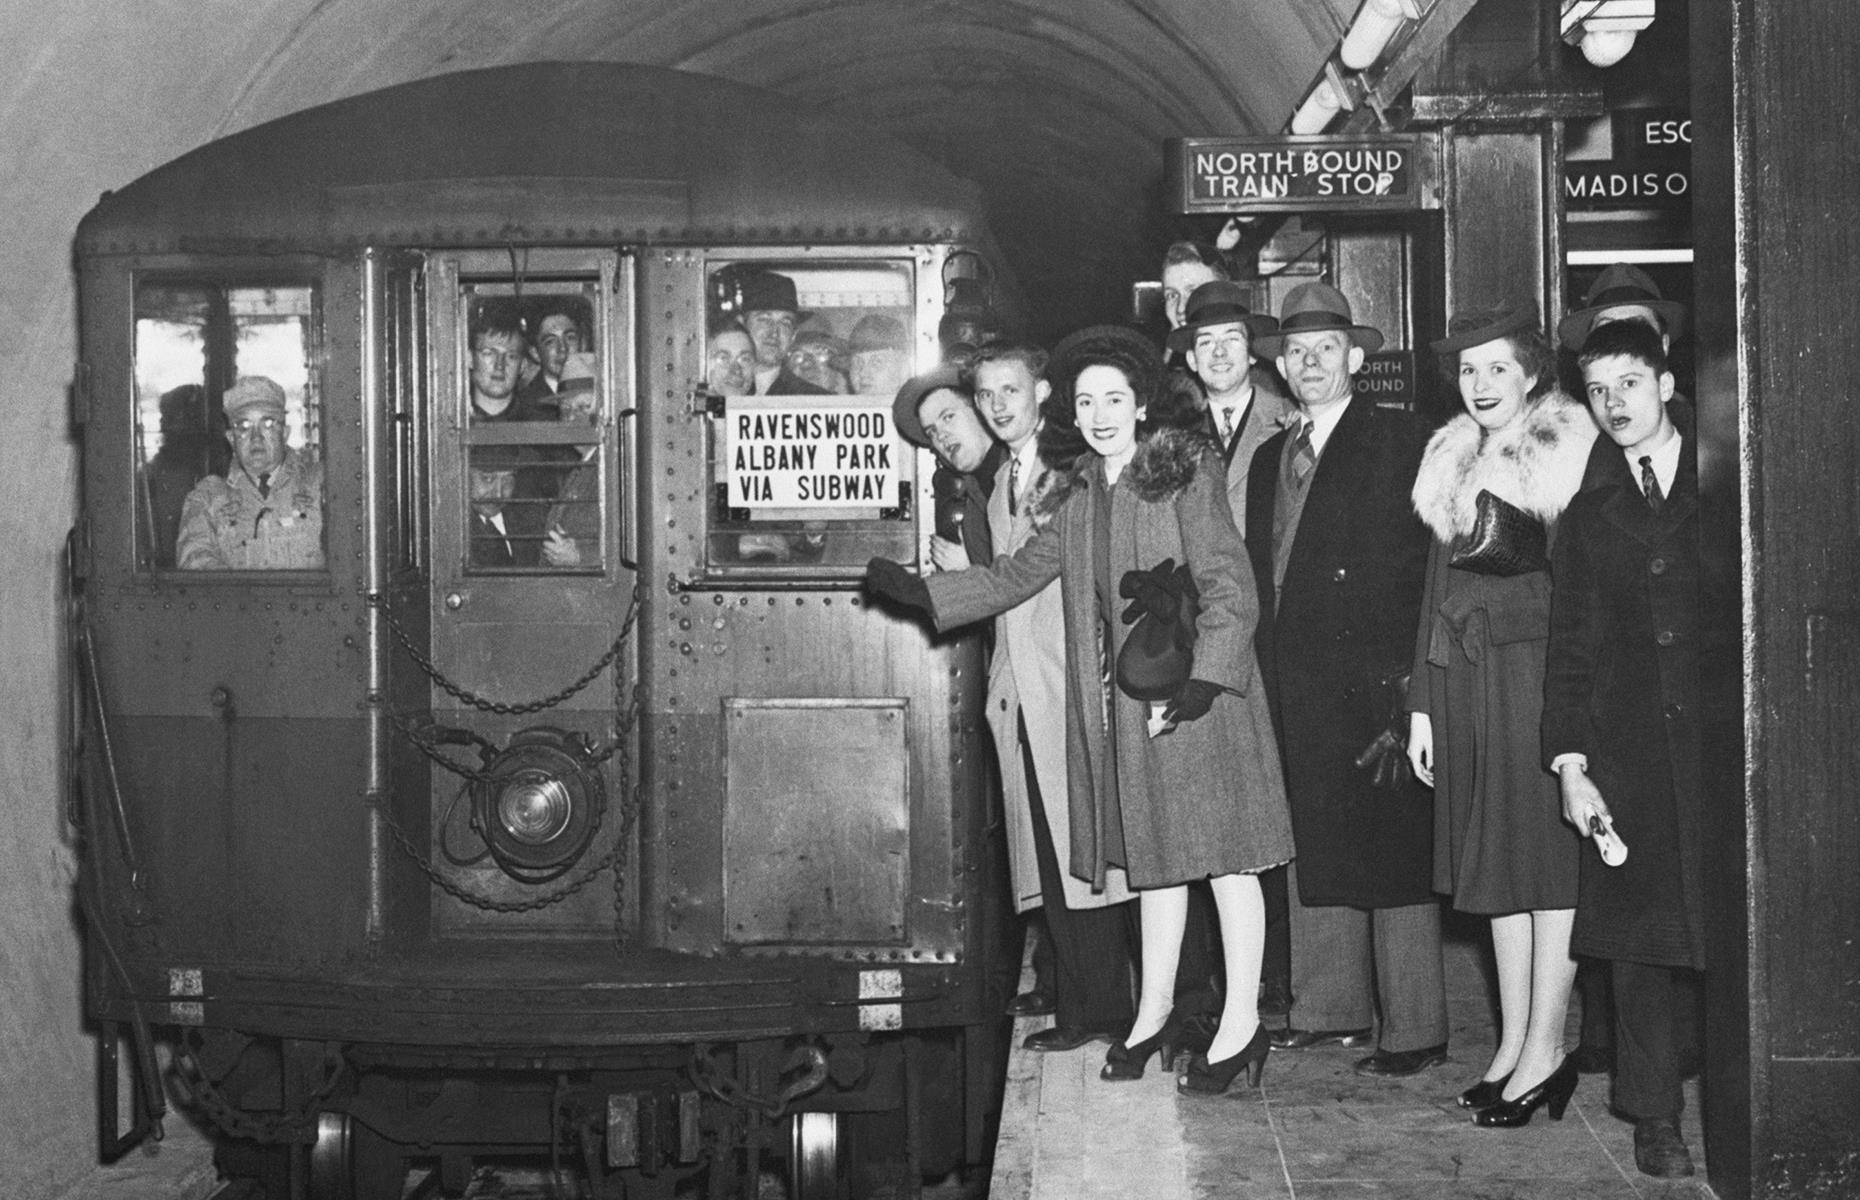 This photo shows a landmark day for Chicago's new subway system as the first paying passengers embark on a trip. Smiling Chicagoans look out from the platform and the crowded train, en route to Ravenswood and Albany Park, in October 1943.